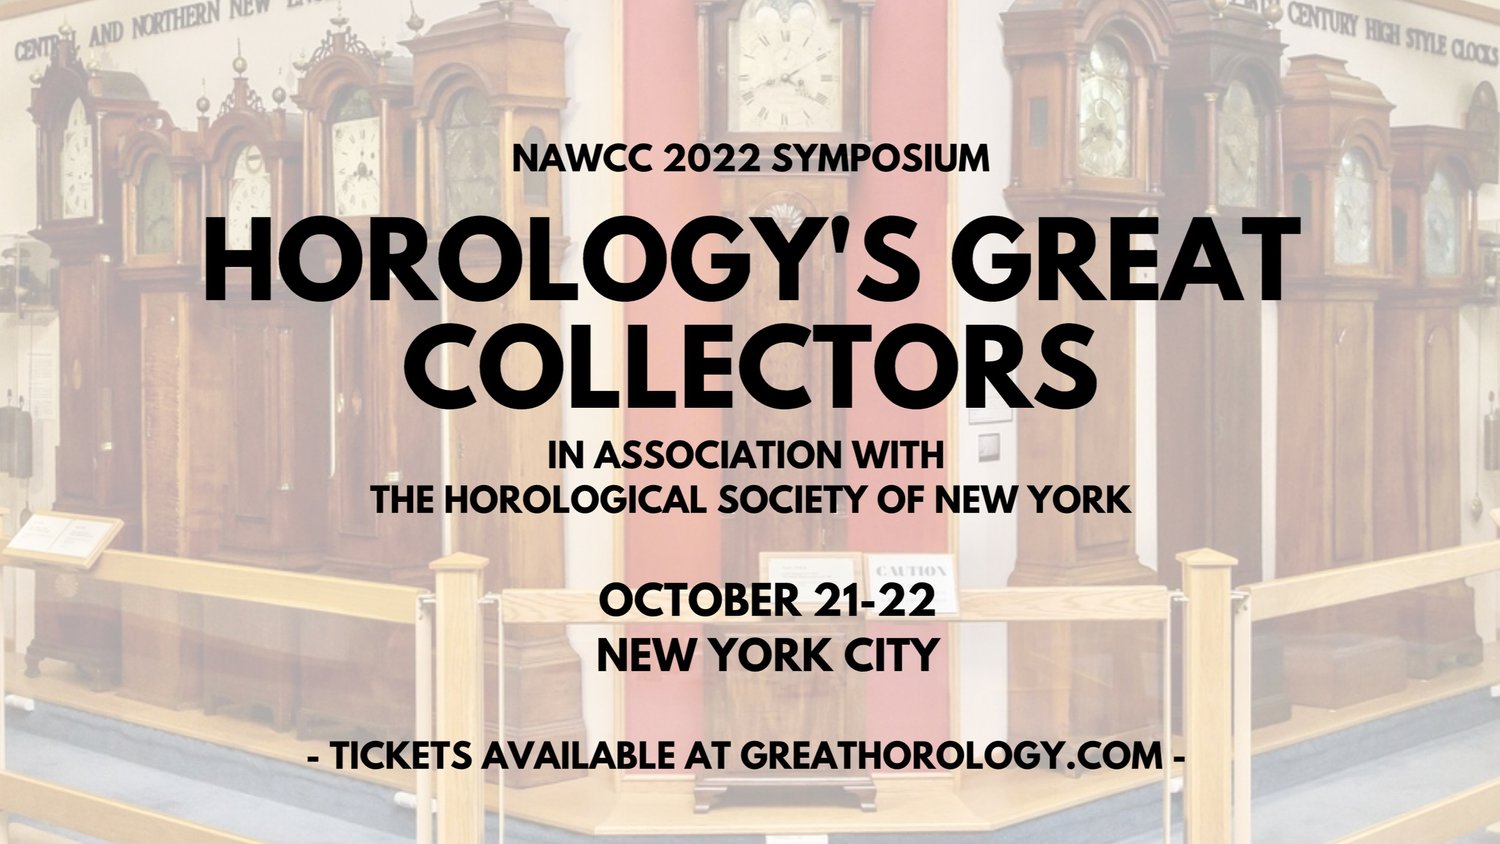 NAWCC X HSNY Announce ?Horology?s Great Collectors? Symposium in NYC From Oct 21 – 23